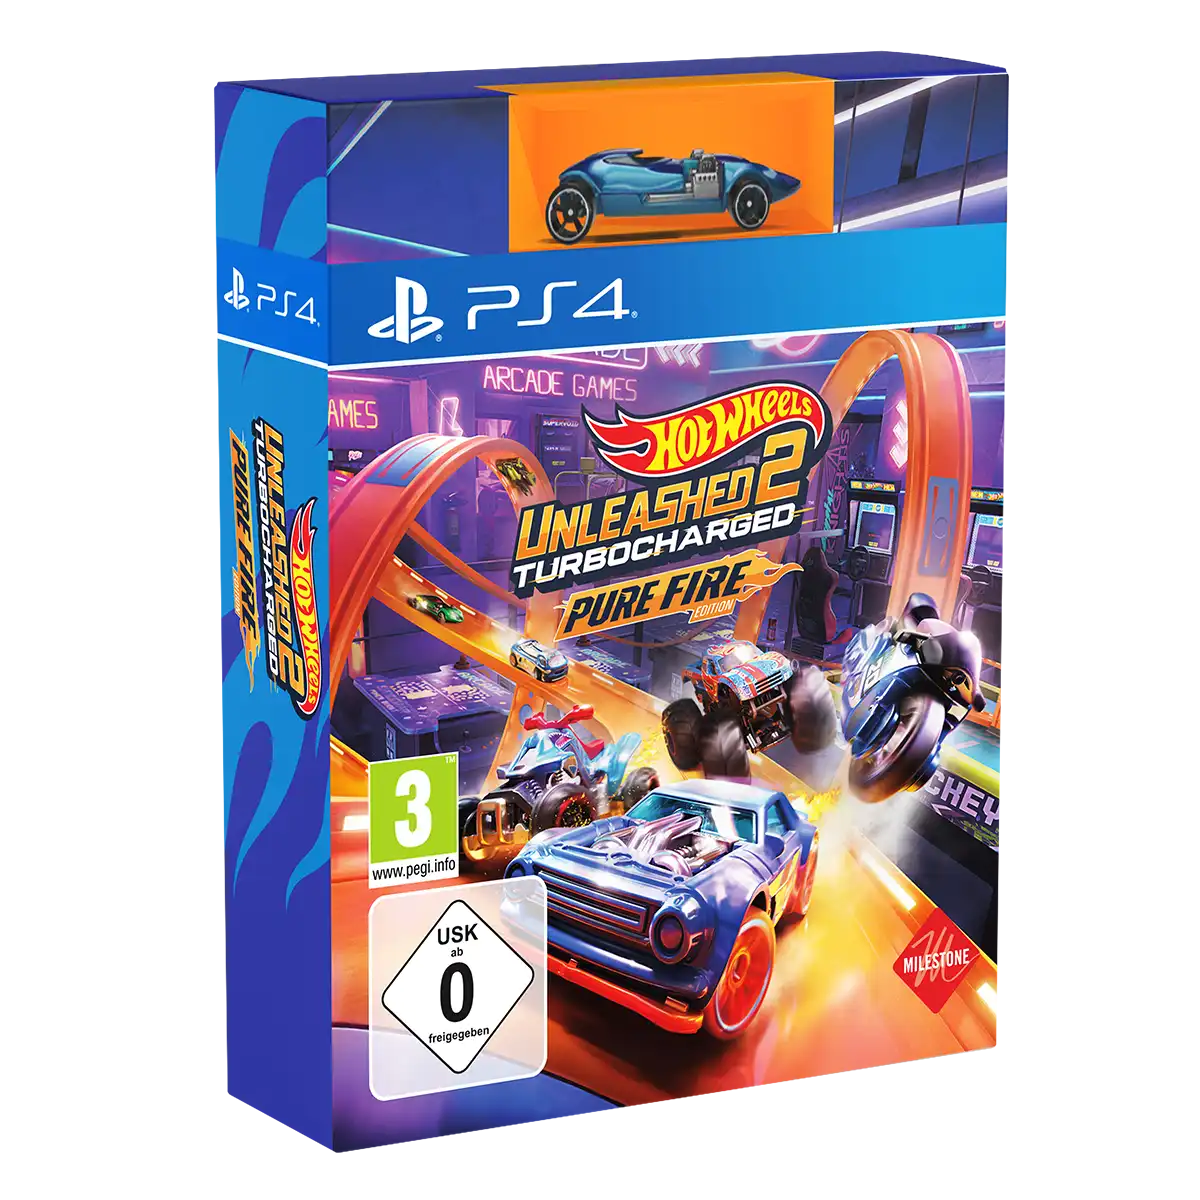 Hot Wheels Unleashed™ 2 Turbocharged Pure Fire Edition (PS4) Image 2